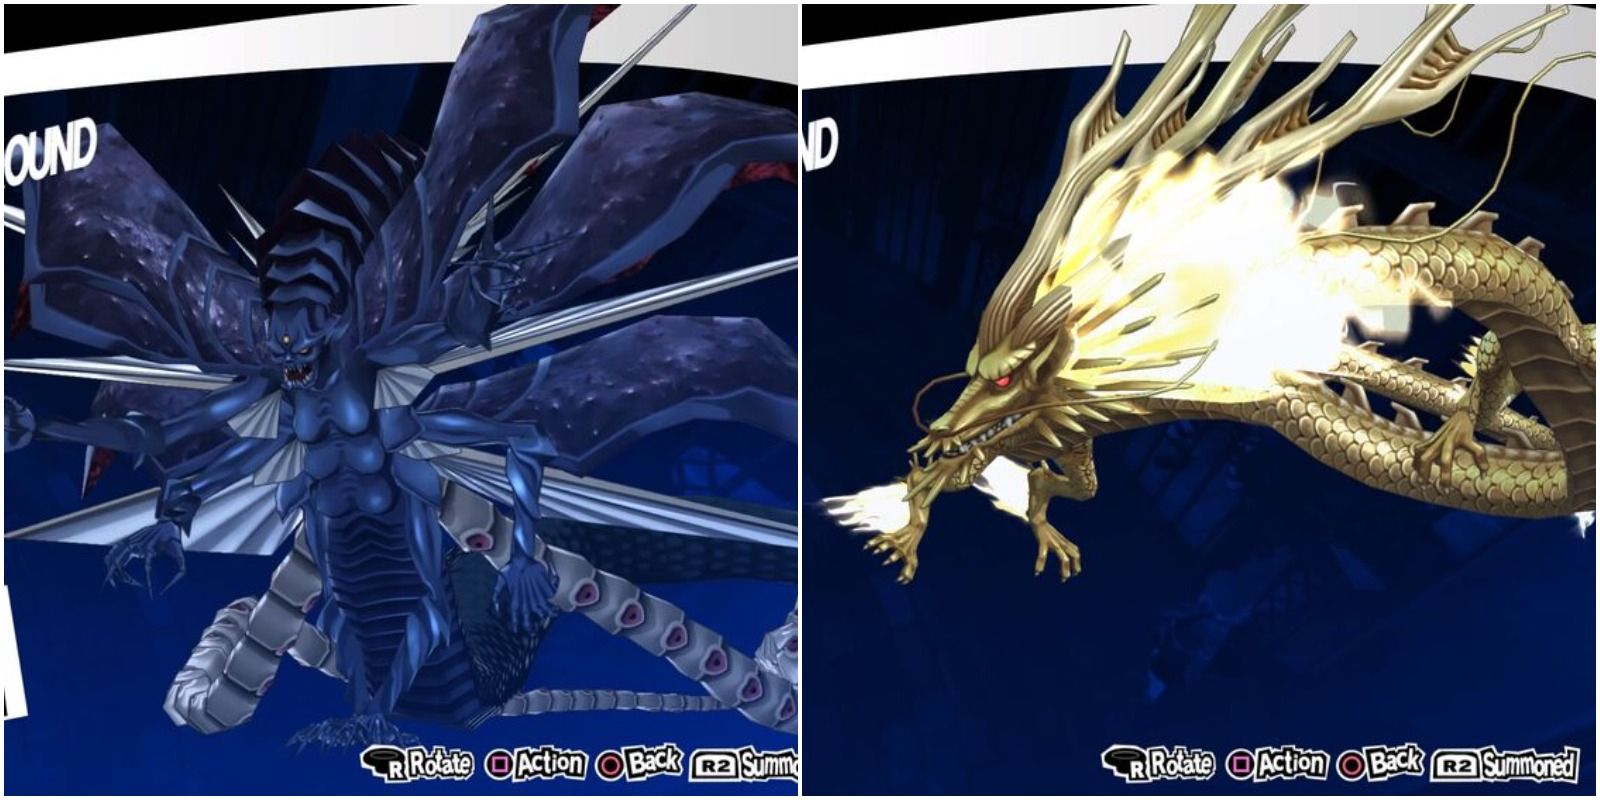 the devil from christian mythology and the golden dragon from chinese lore in persona 5 royal